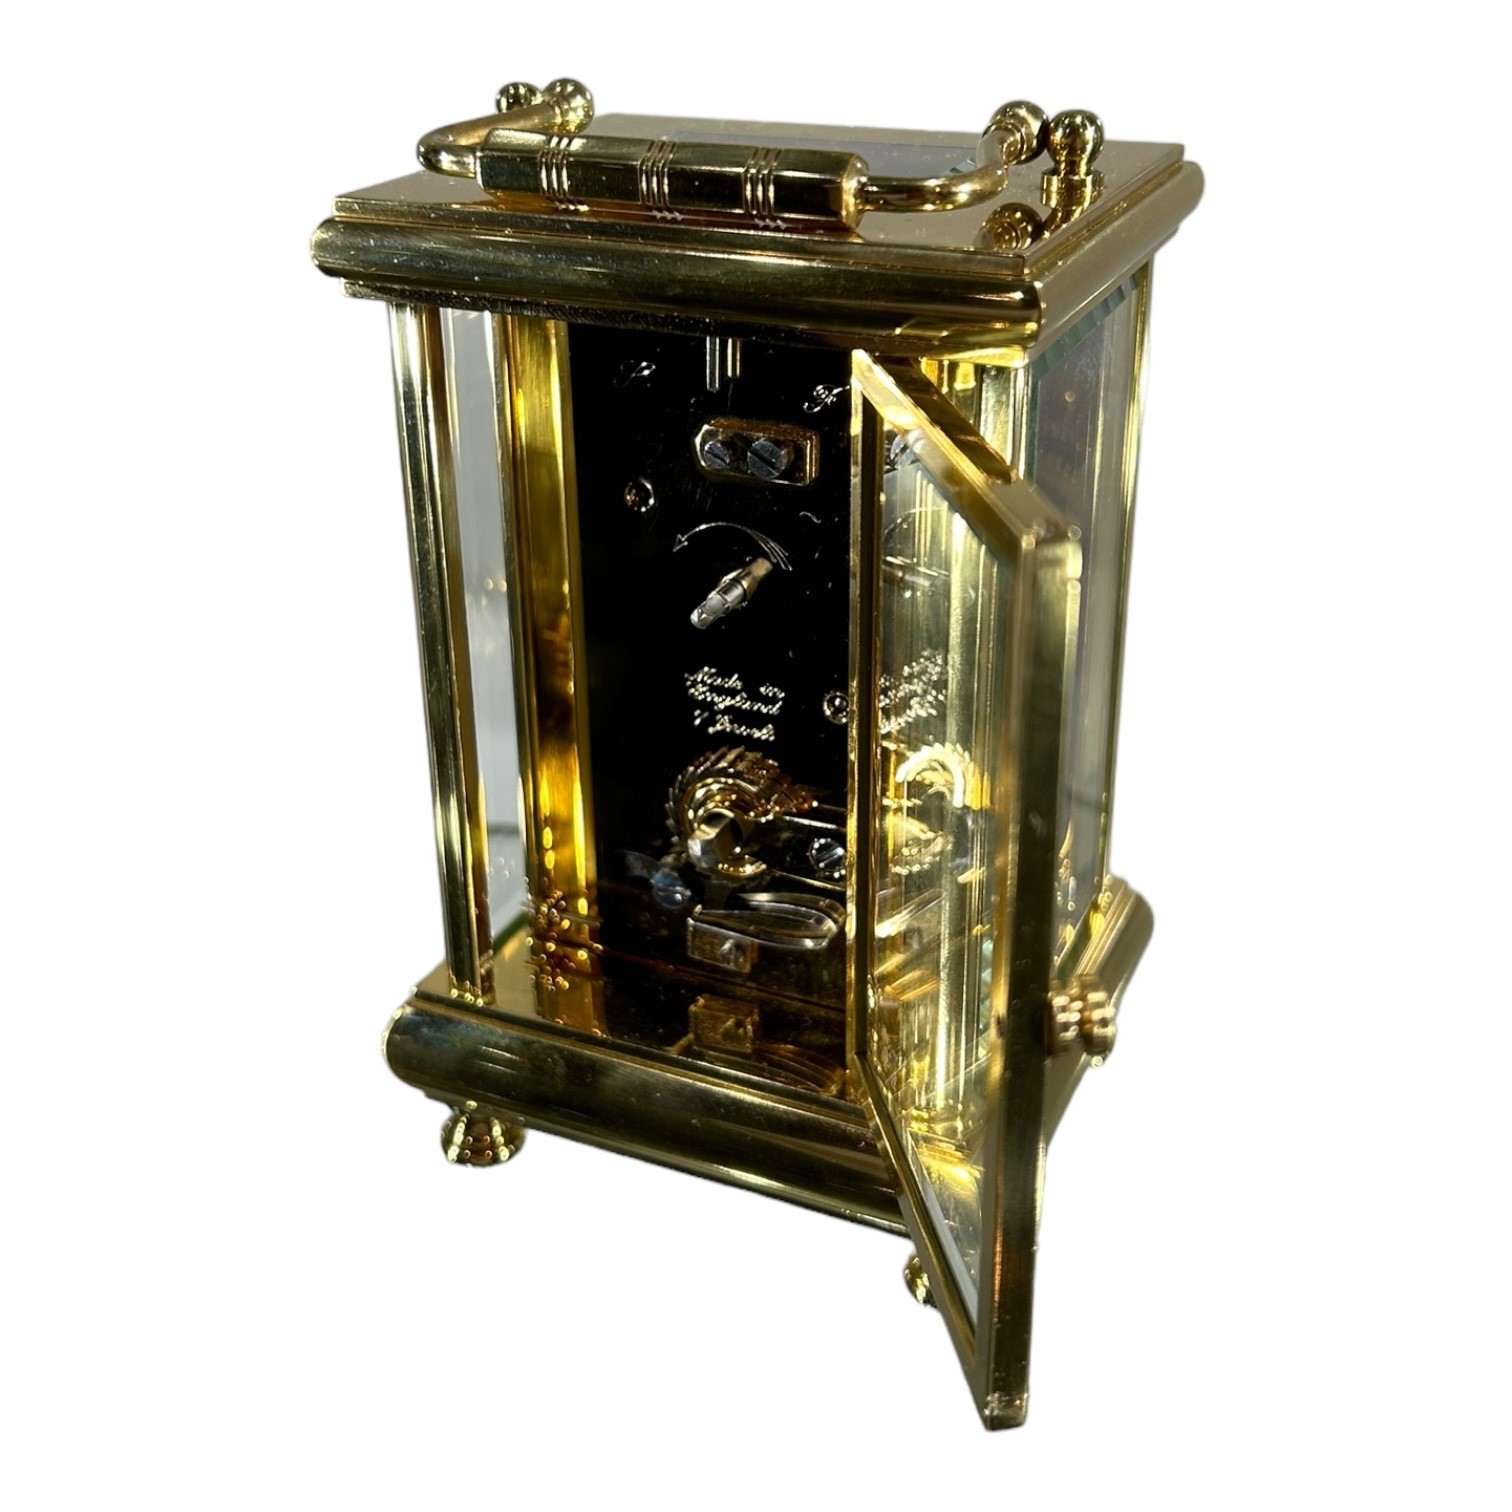 L'EPÉE FOR PALL MALL GOLDSMITHS, LONDON, AN EARLY 21ST CENTURY BRASS 8 DAY CARRIAGE CLOCK Having - Image 6 of 7